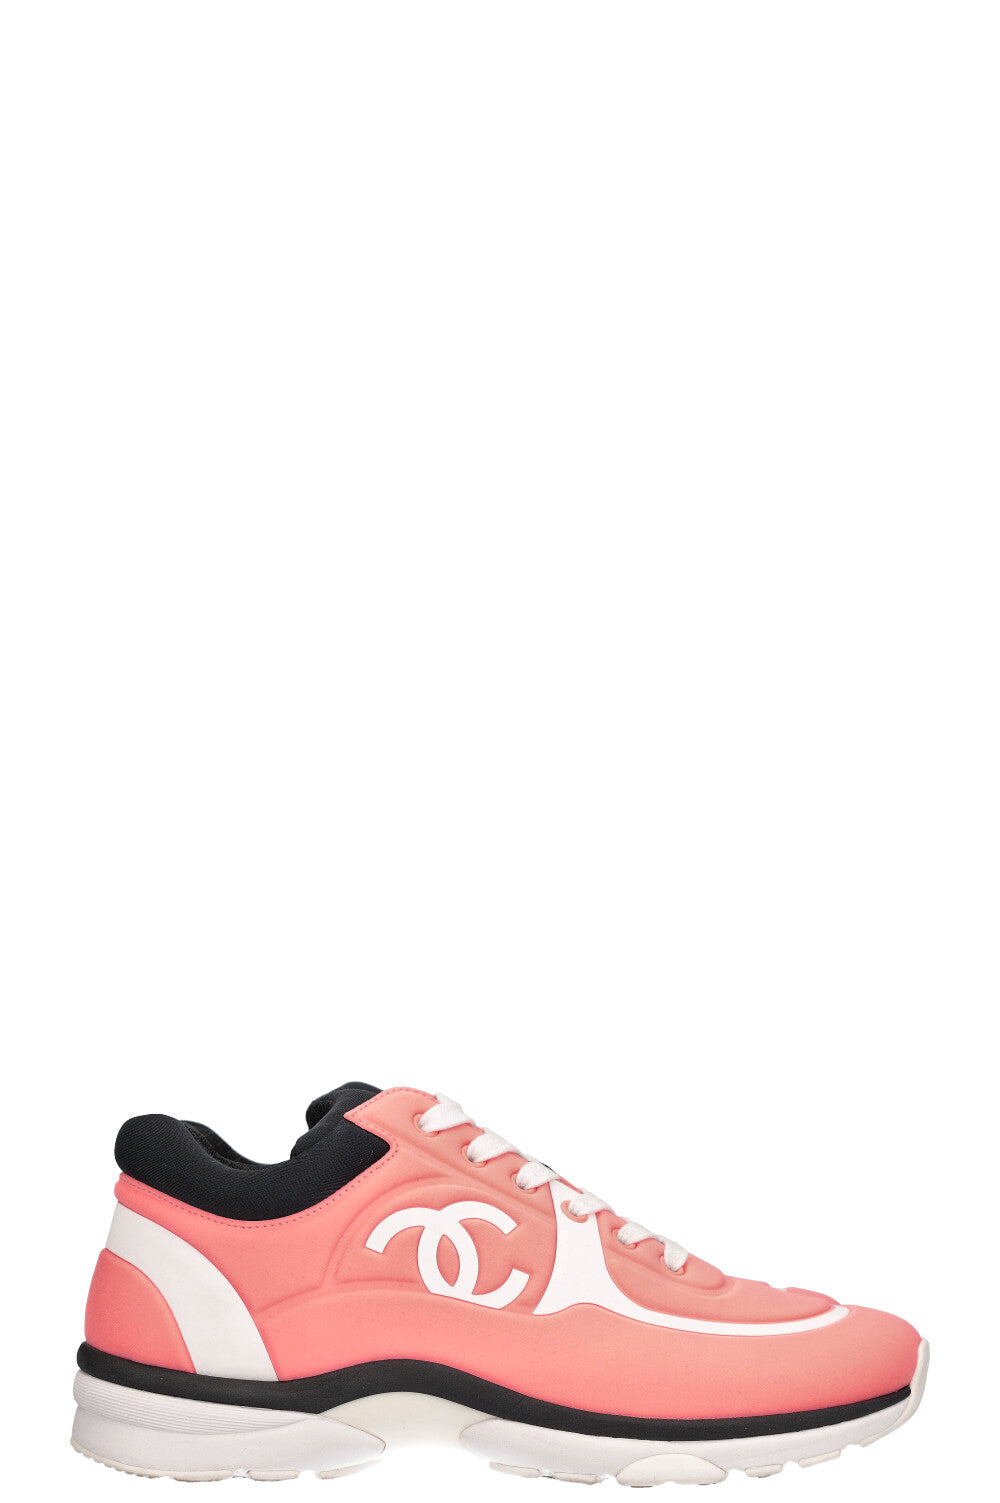 CHANEL CC Sneakers Coral